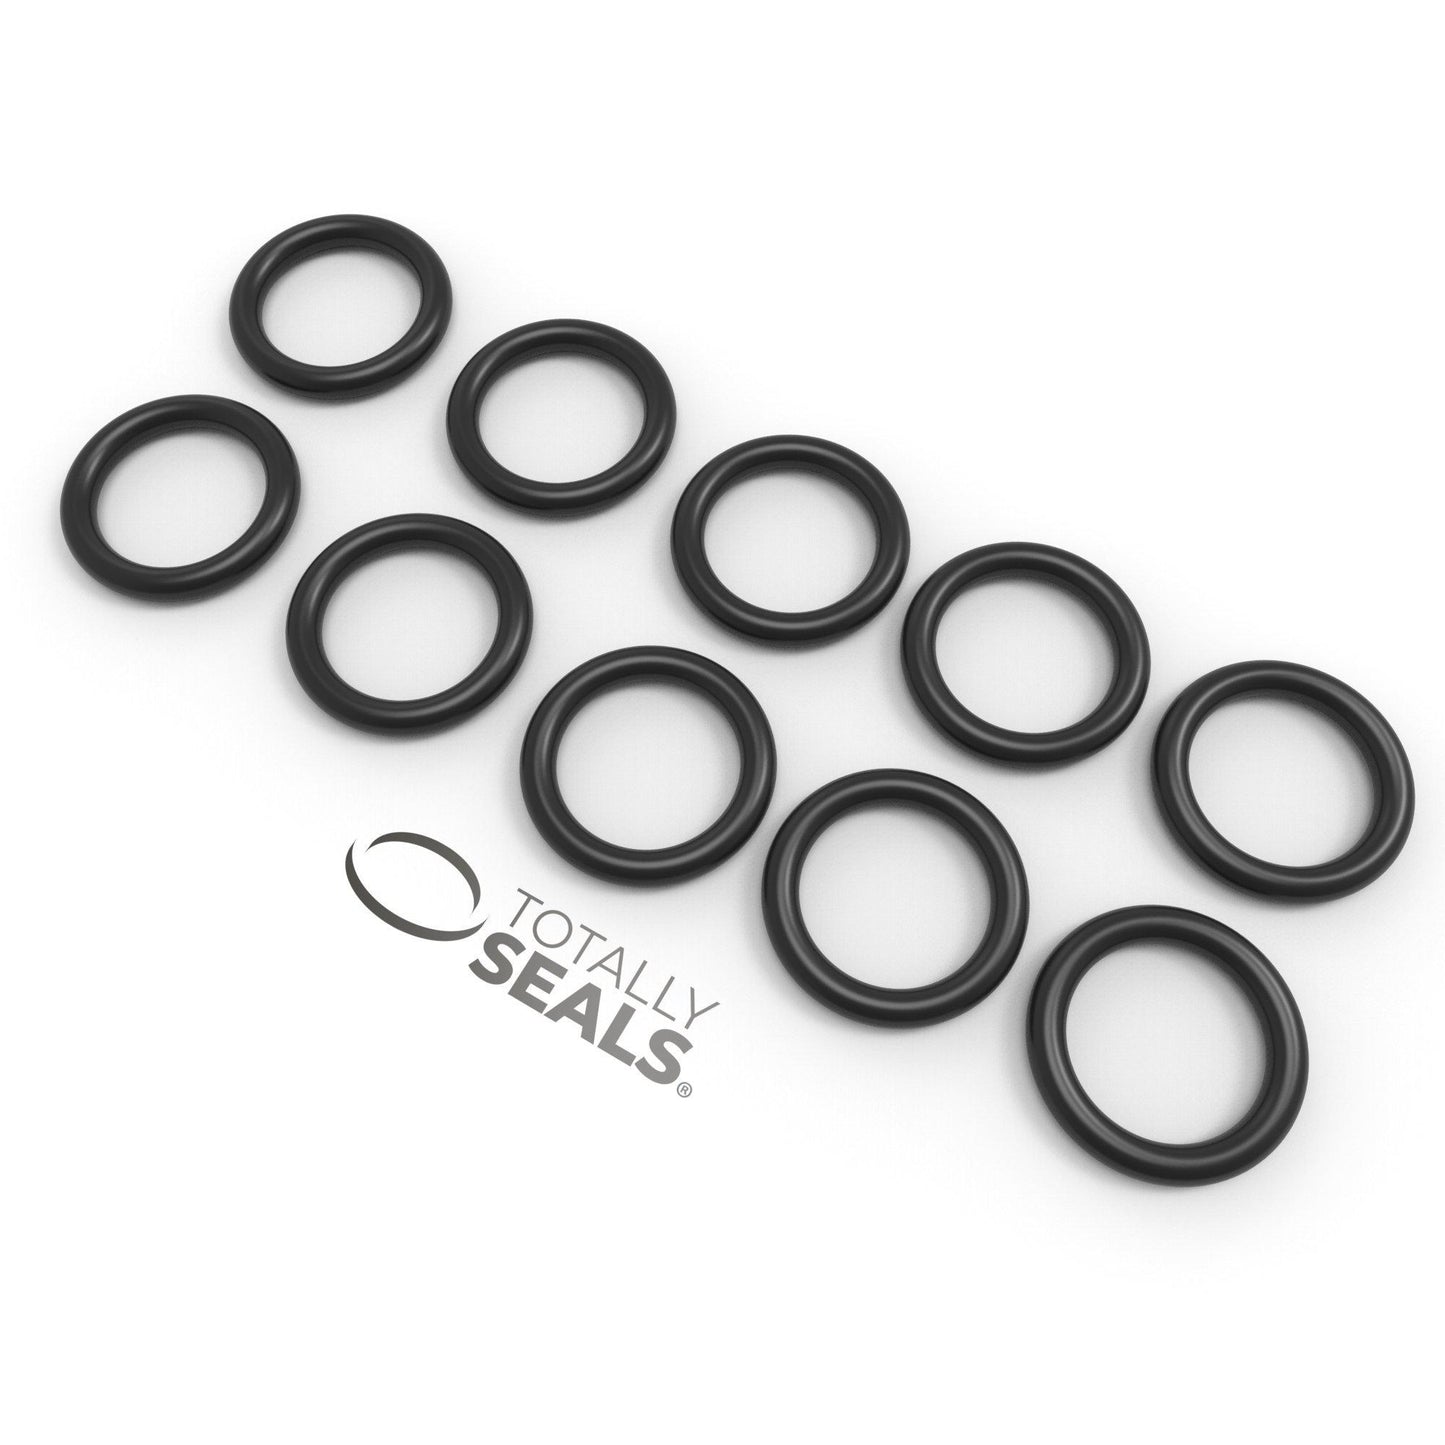 10mm x 1mm (12mm OD) Nitrile O-Rings - Totally Seals®